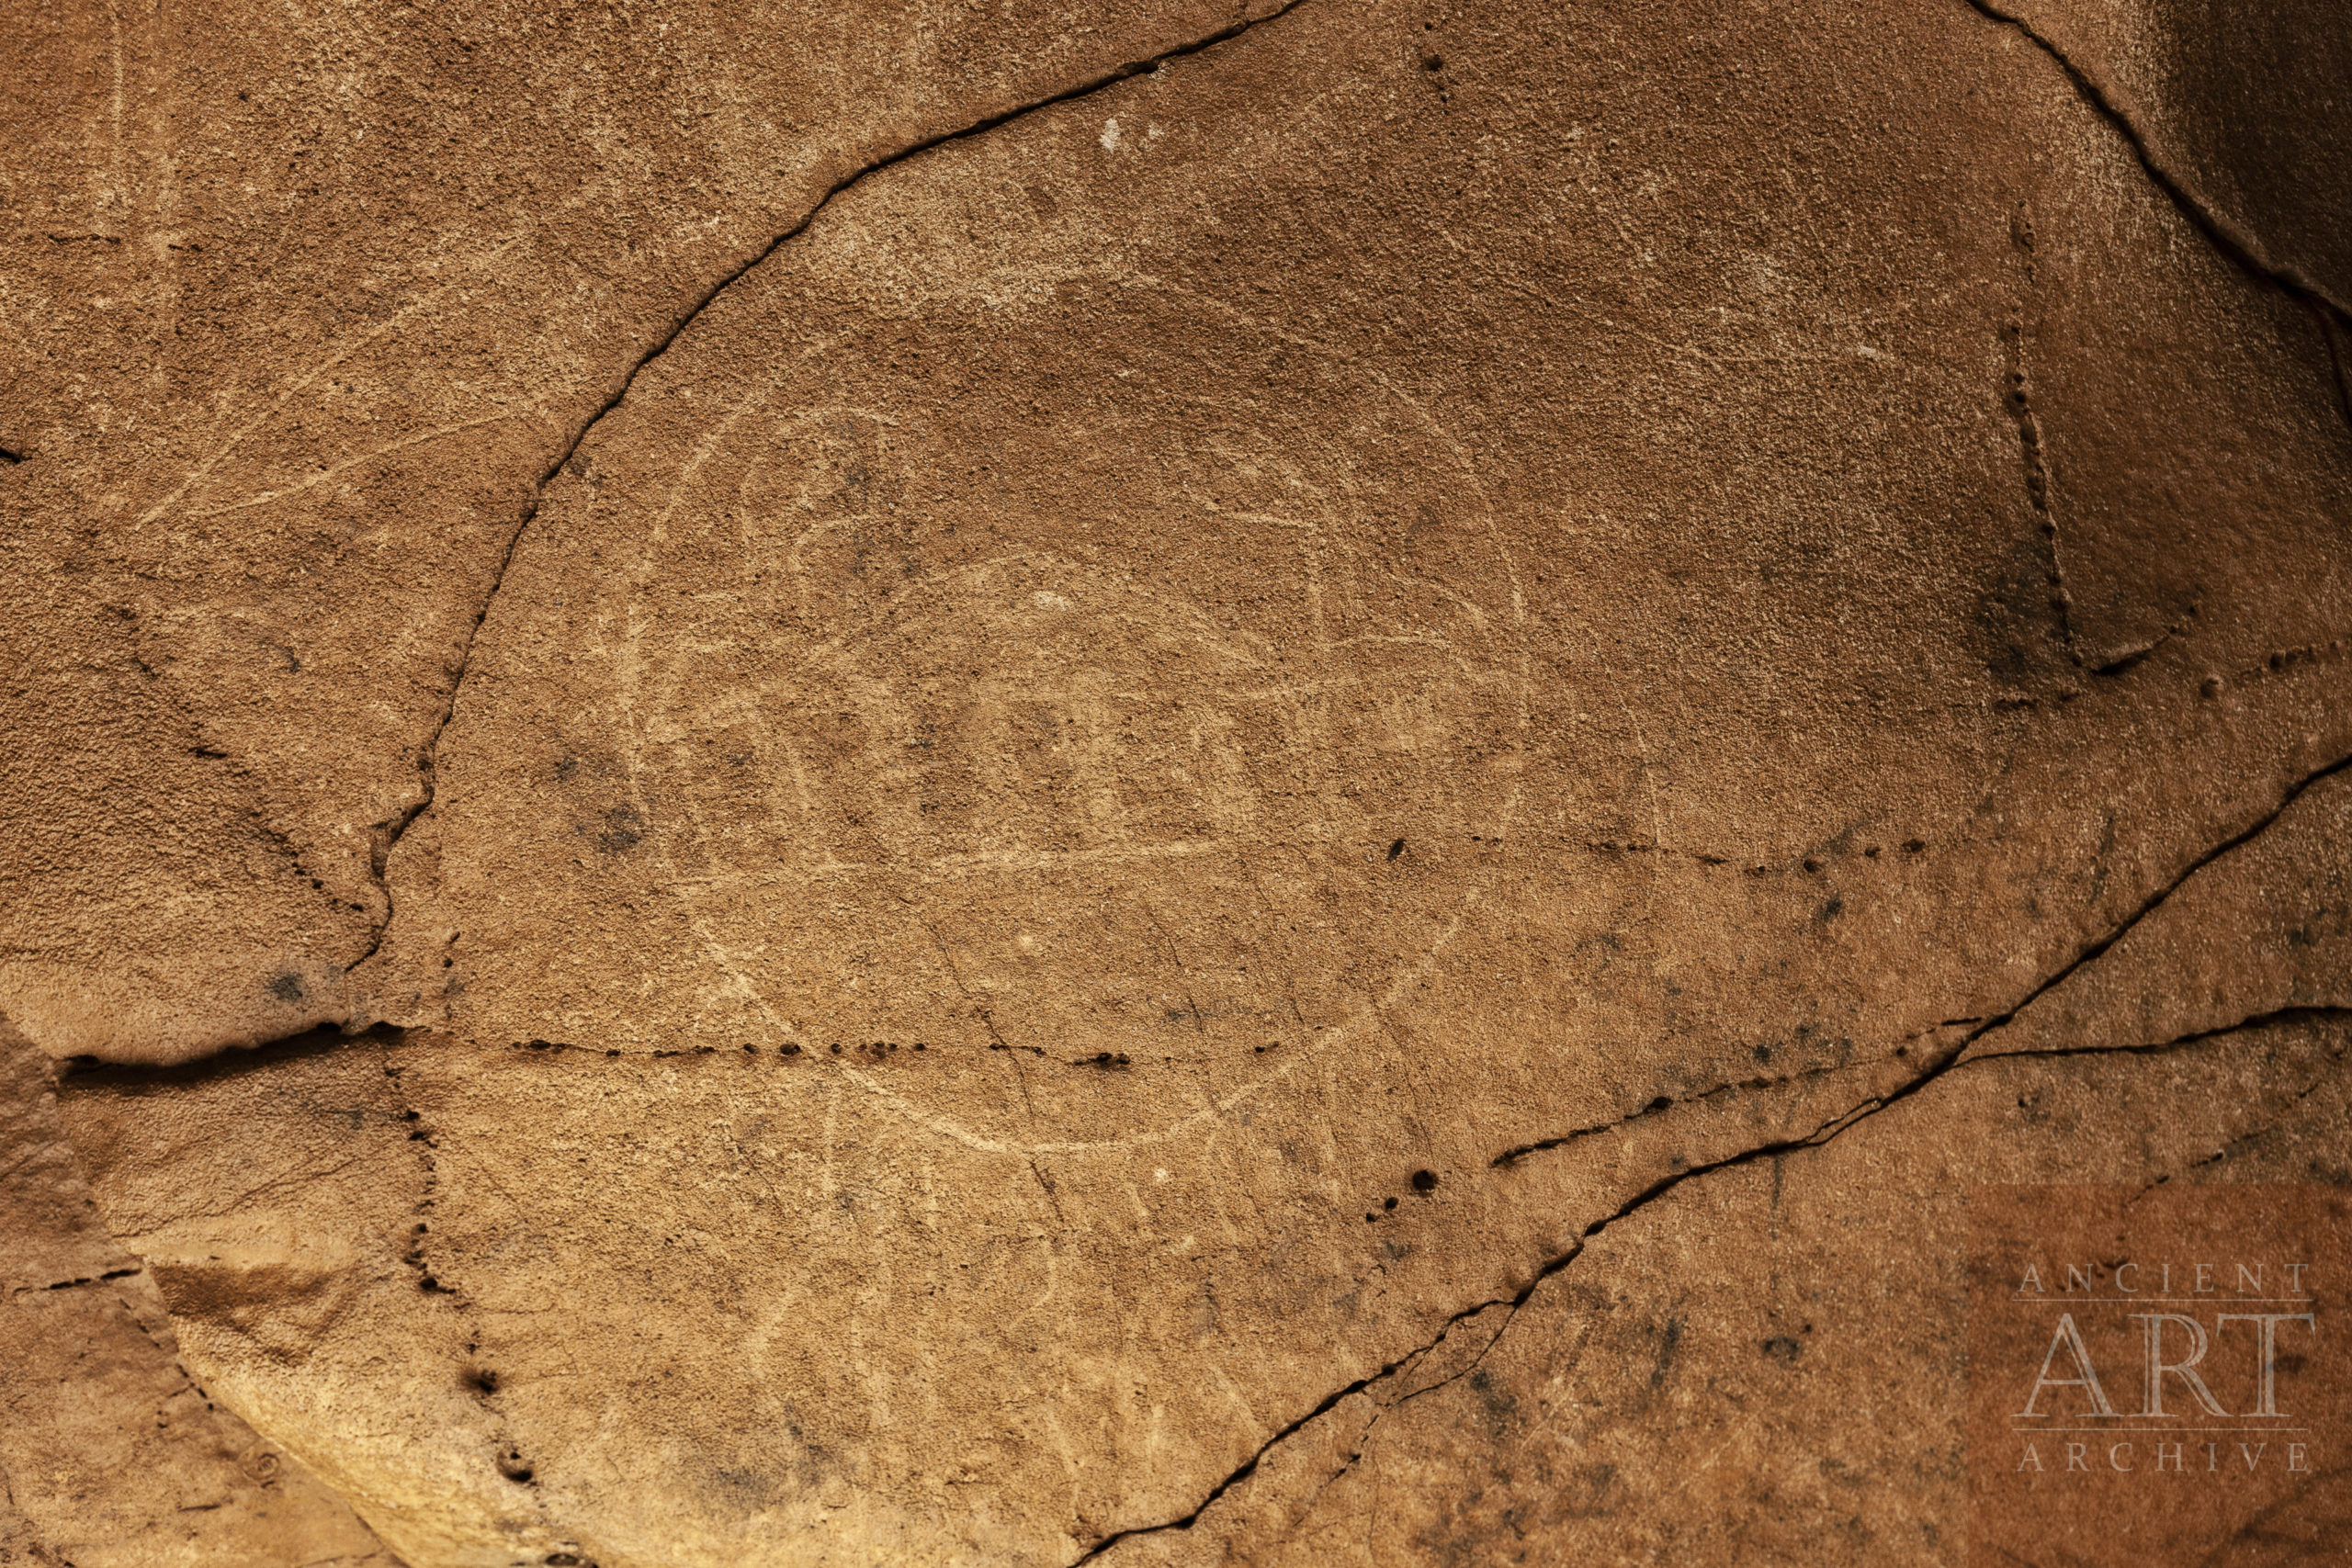 A toothy mouth petroglyph in Devilstep Hollow Cave. The image was first identified as Mississippian by Dr. Jan Simek of the University of Tennessee.